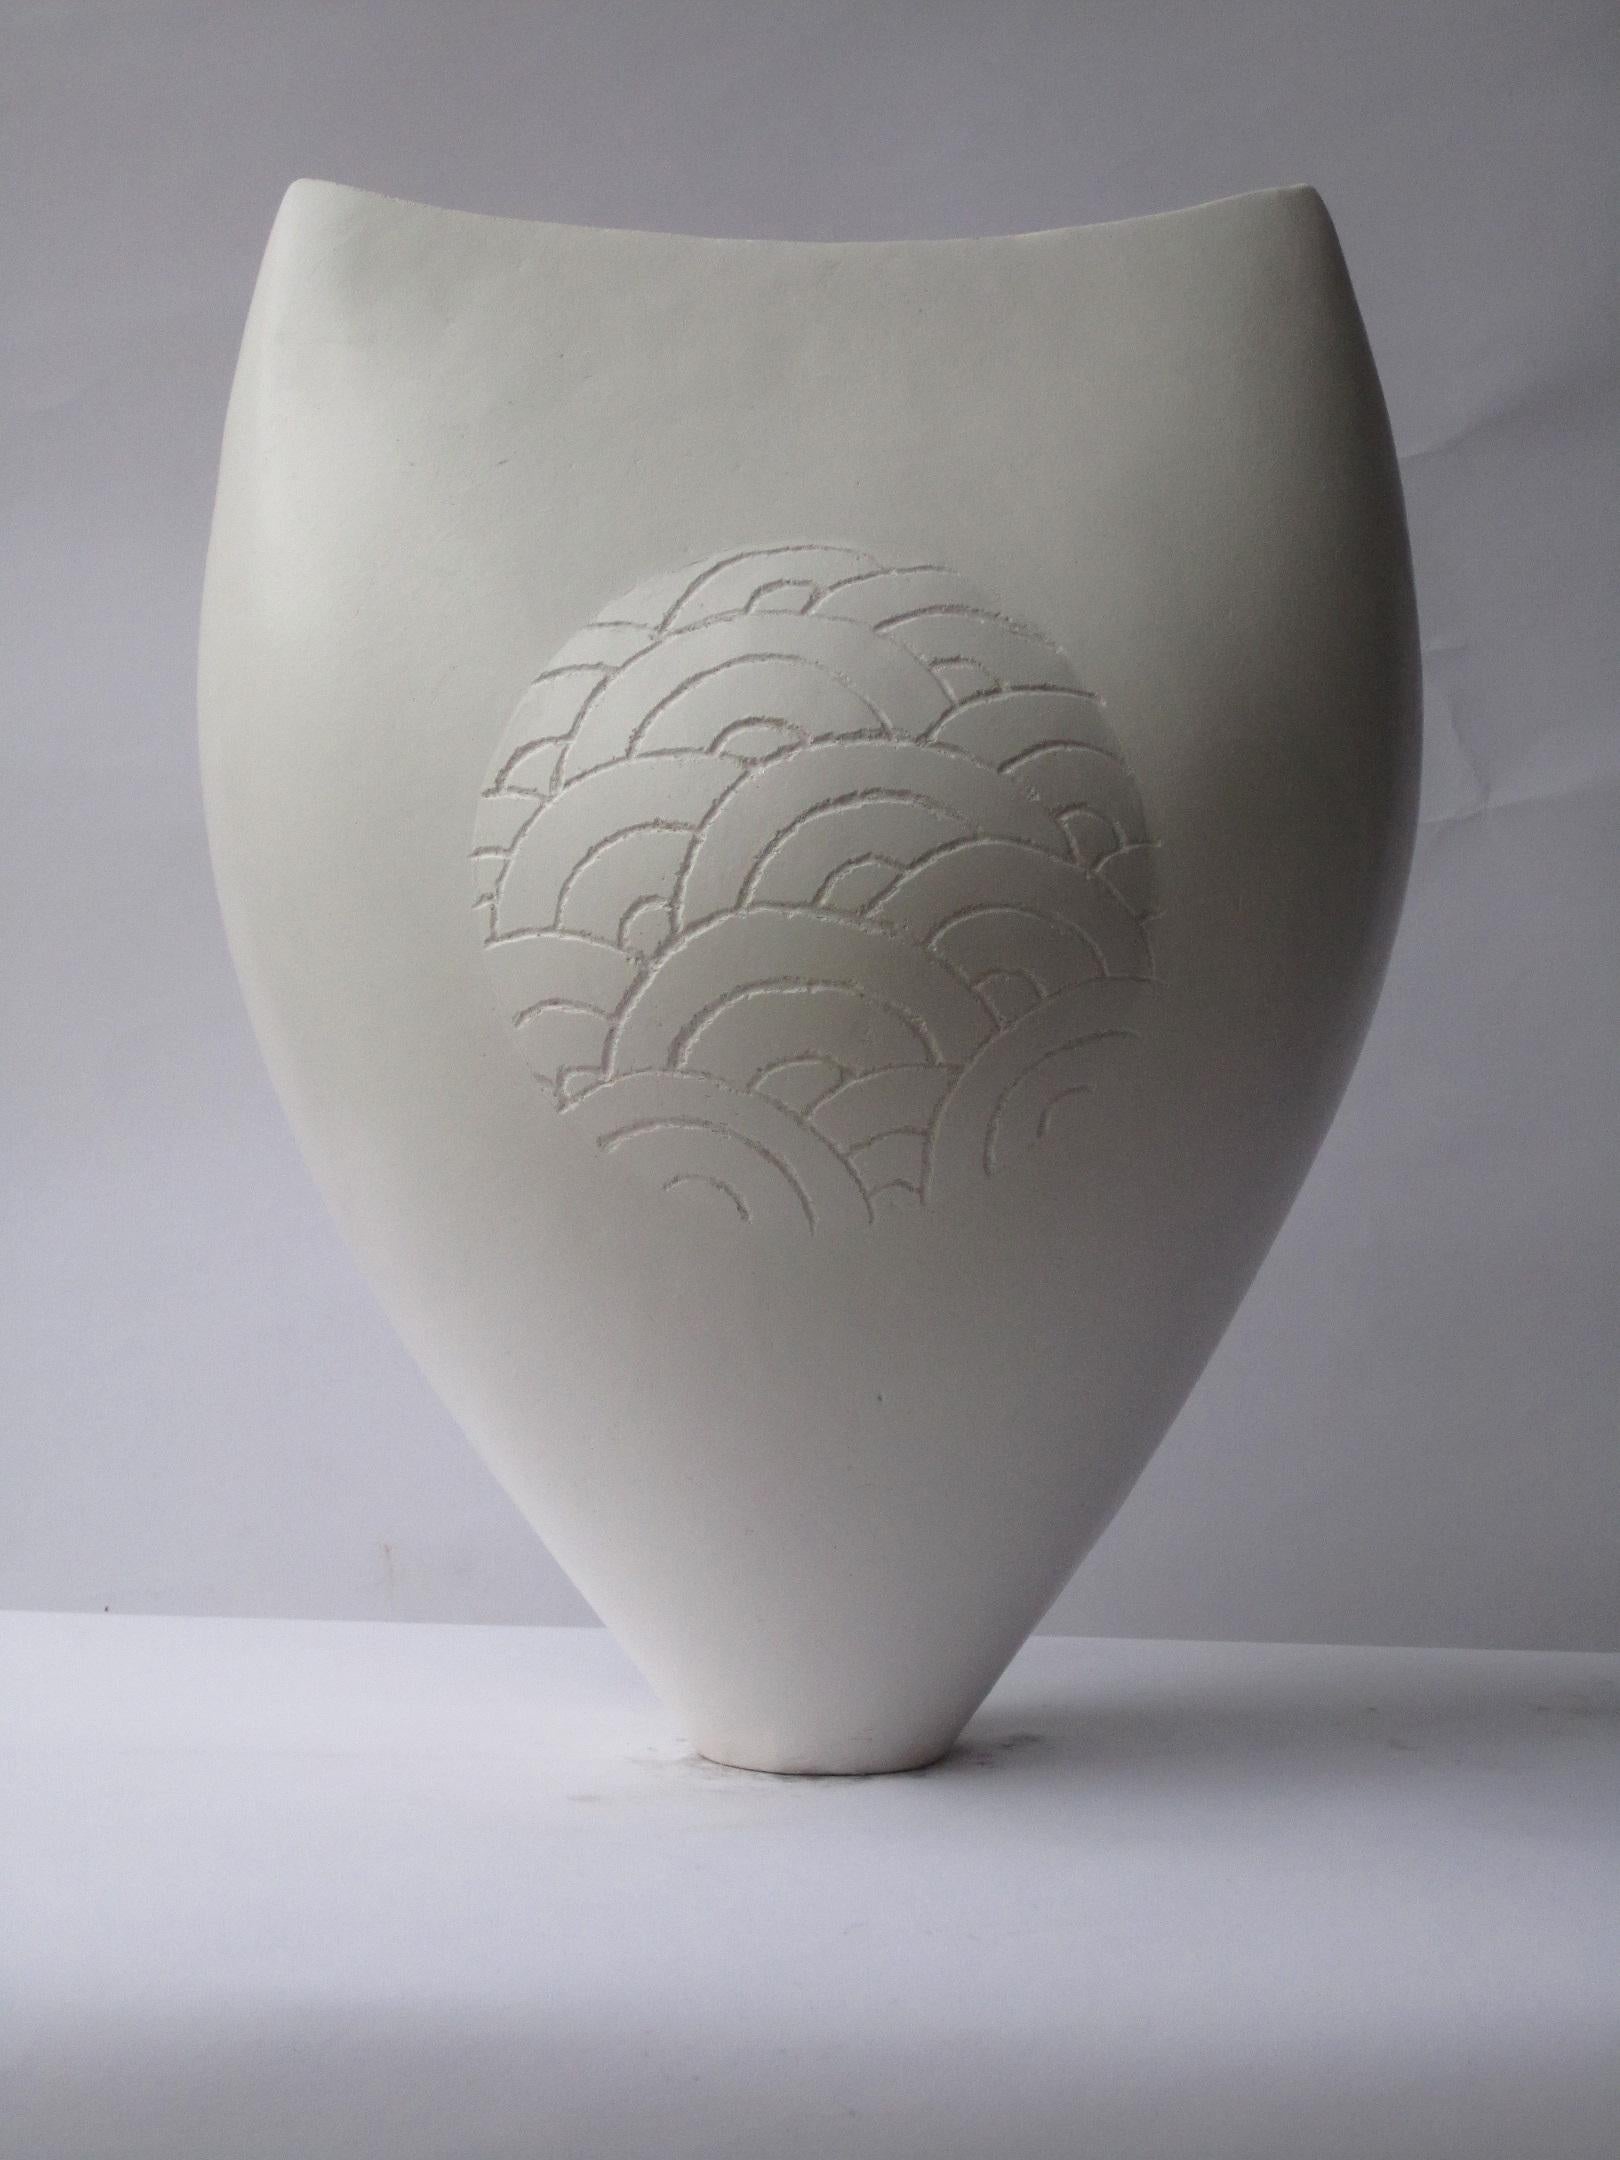 White Curved Cloud is a unique ceramic sculpture by contemporary artist Tien Wen, dimensions are 41.5 × 30 × 18 cm (16.3 × 11.8 × 7.1 in). 
The sculpture is signed and comes with a certificate of authenticity.

The purity of this sculpture, its